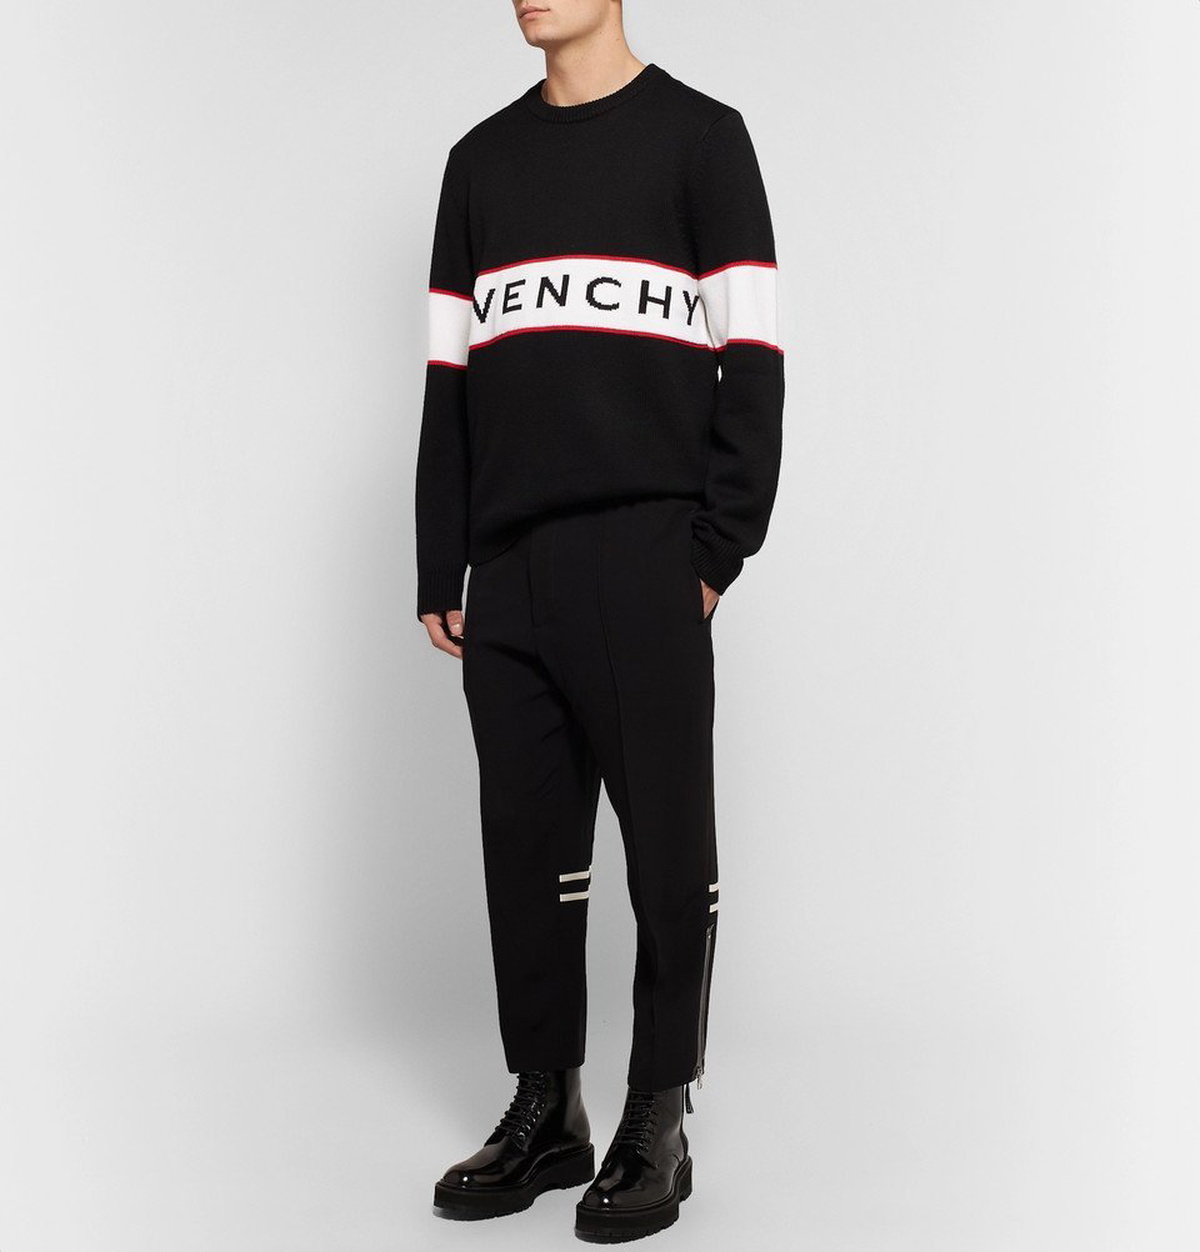 givenchy sweater men